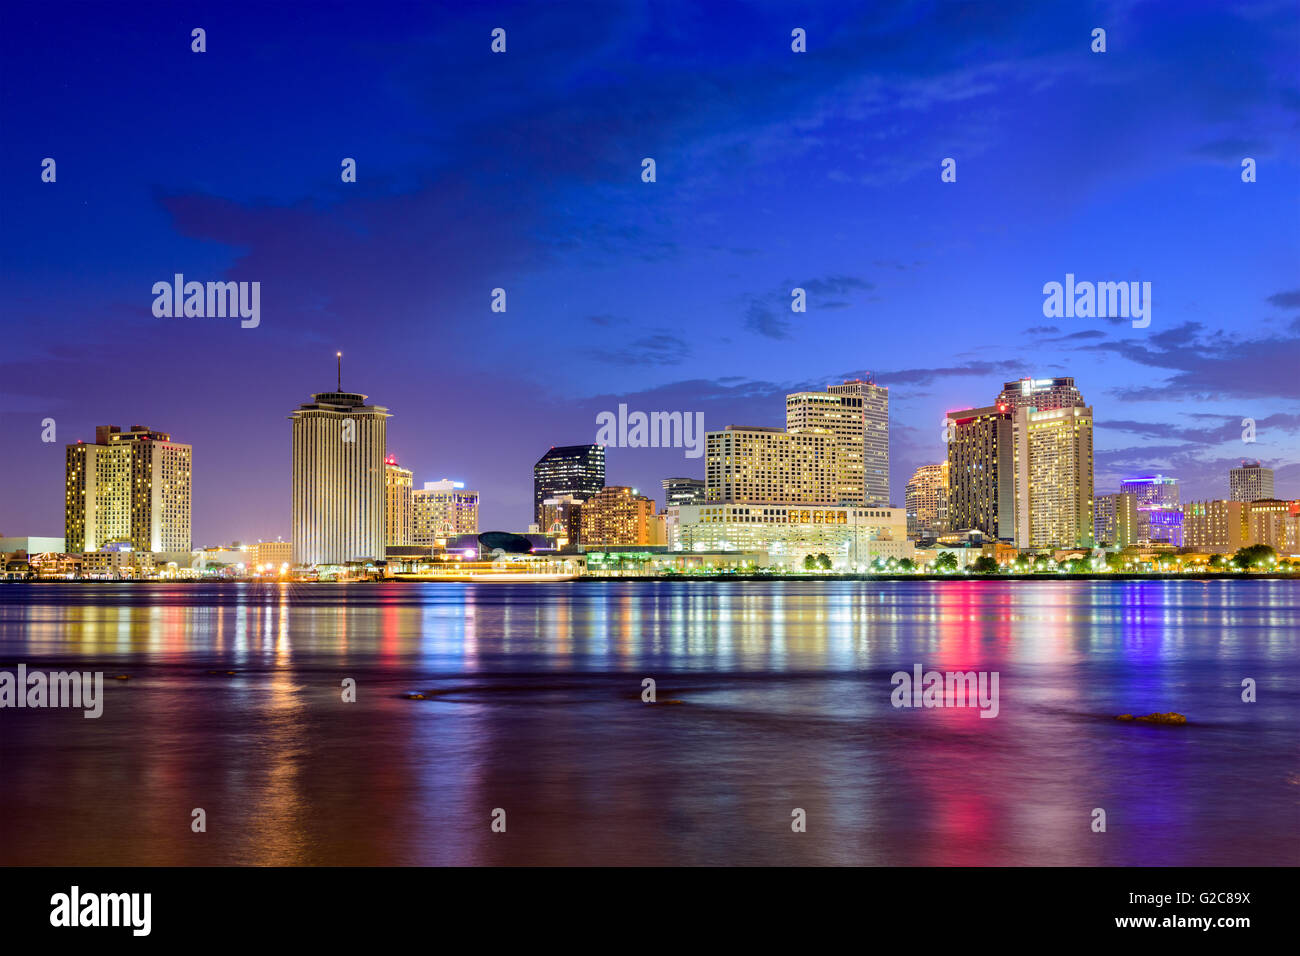 New Orleans, Louisiana, USA skyline on the Mississippi River. Stock Photo